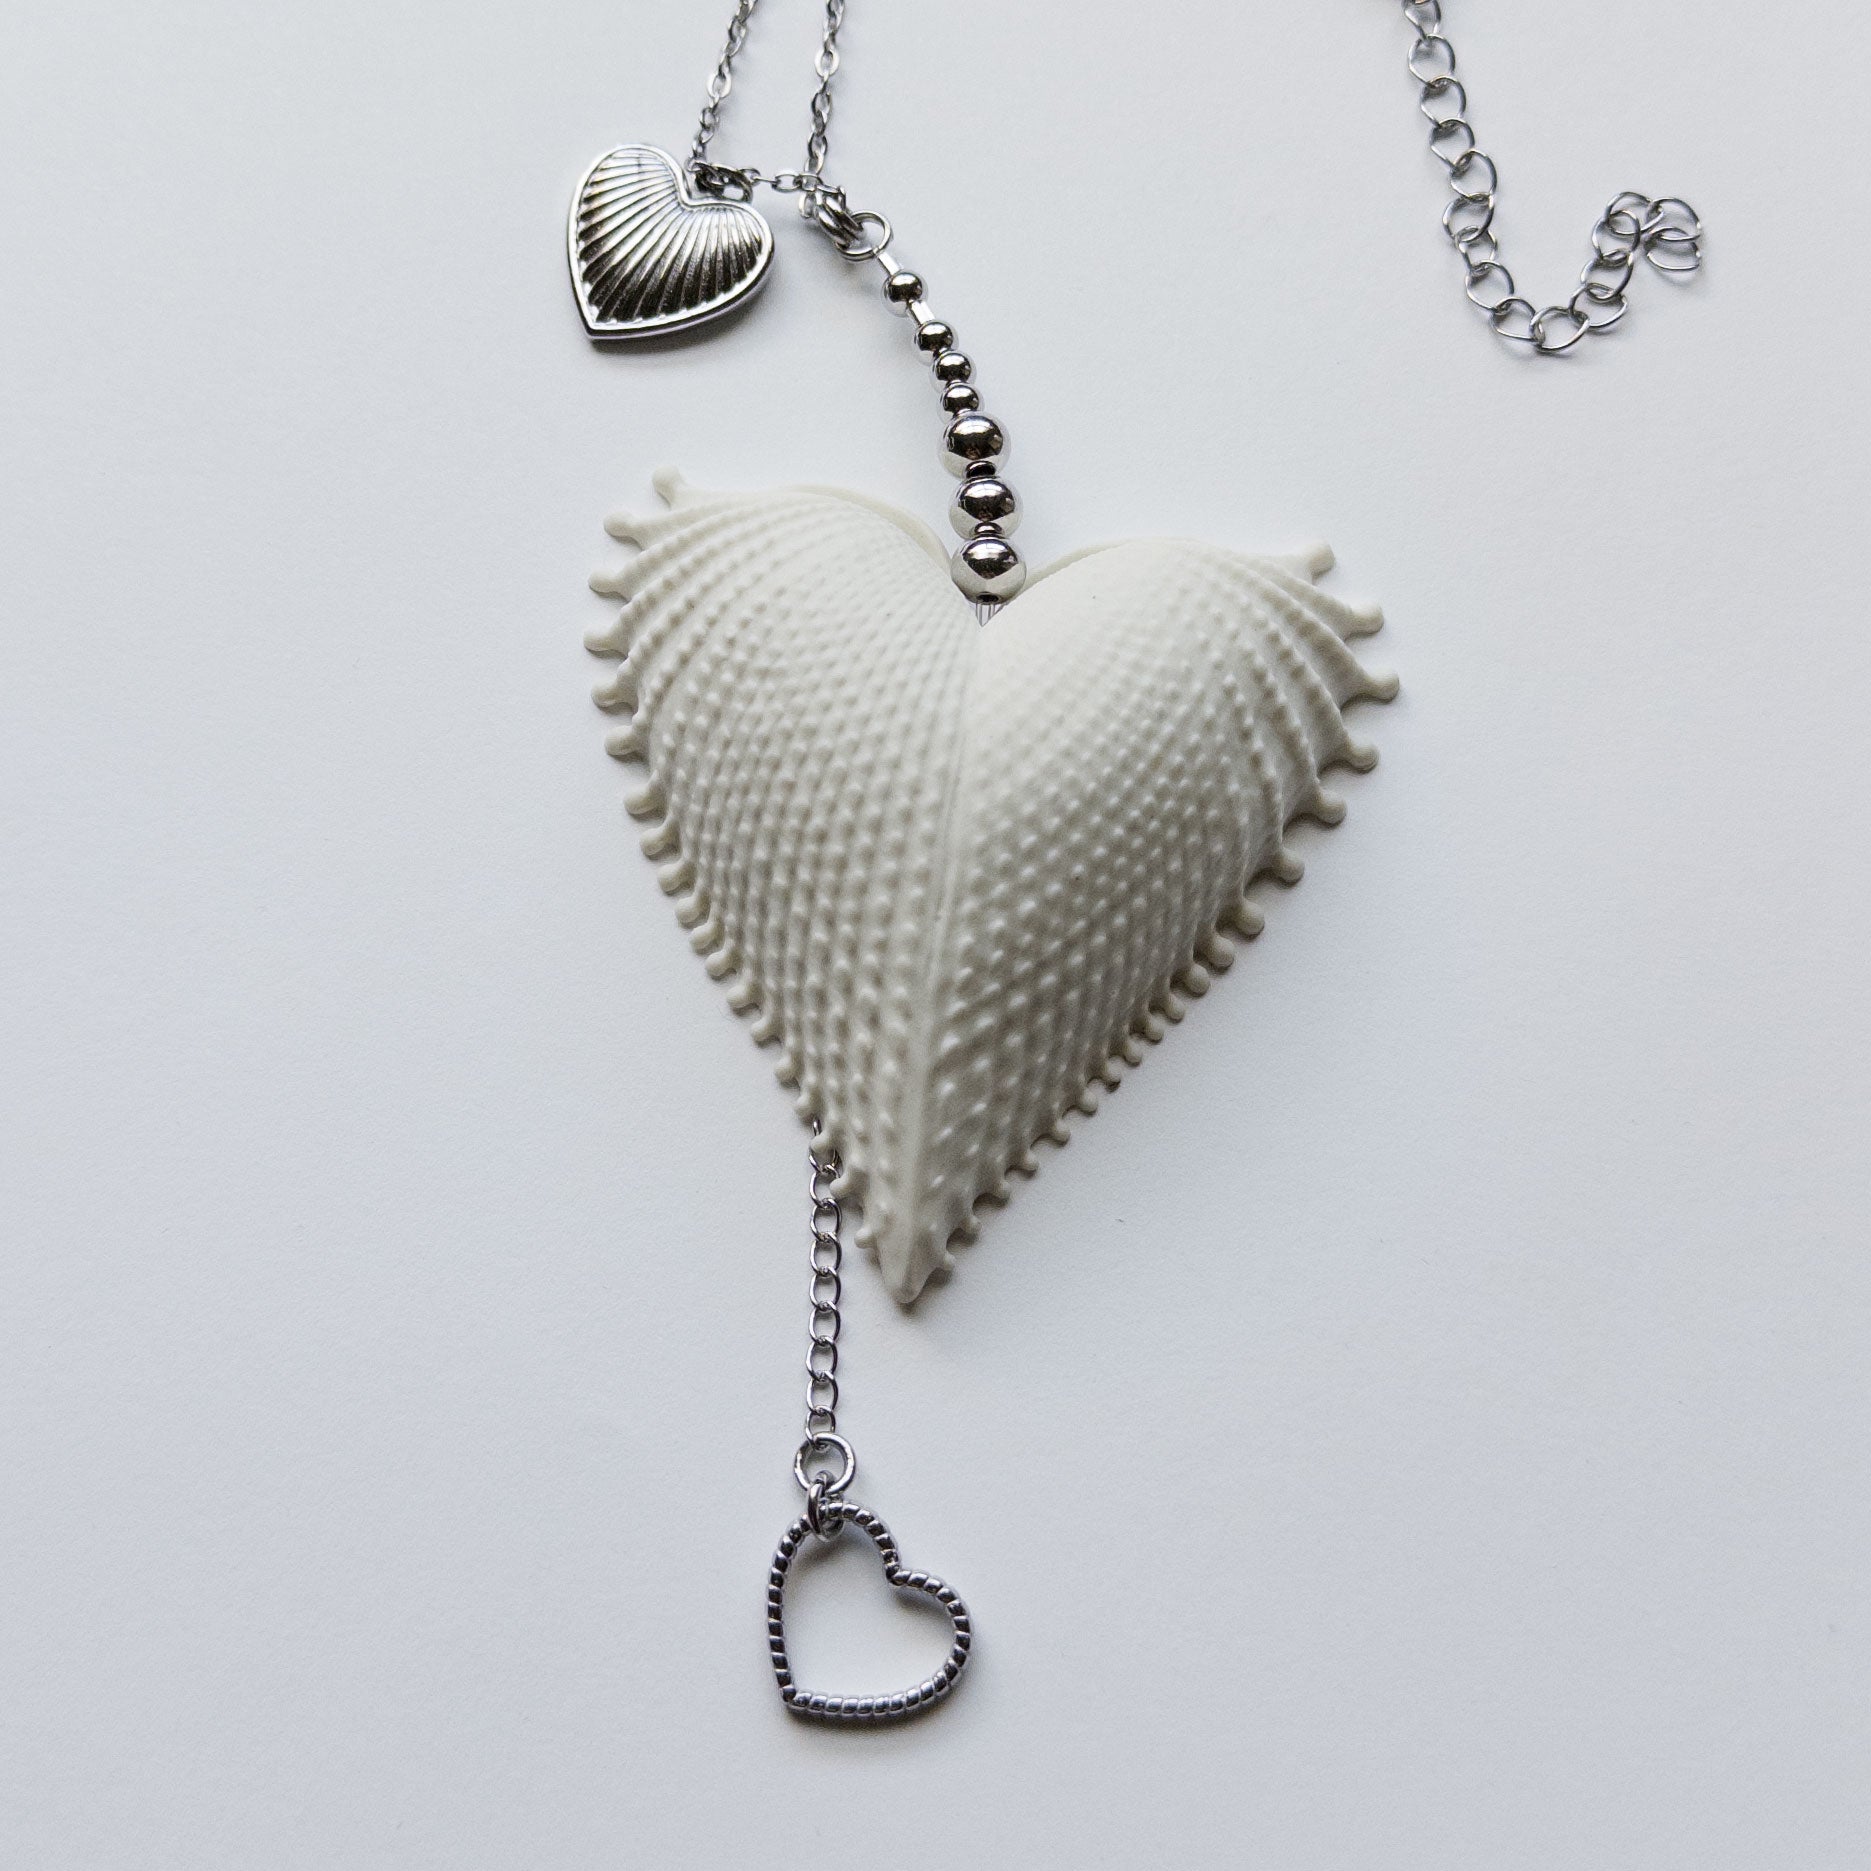 Multi charms necklace featuring a large vintage scallop heart, stainless steel heart charms, on a stainless steel chain.